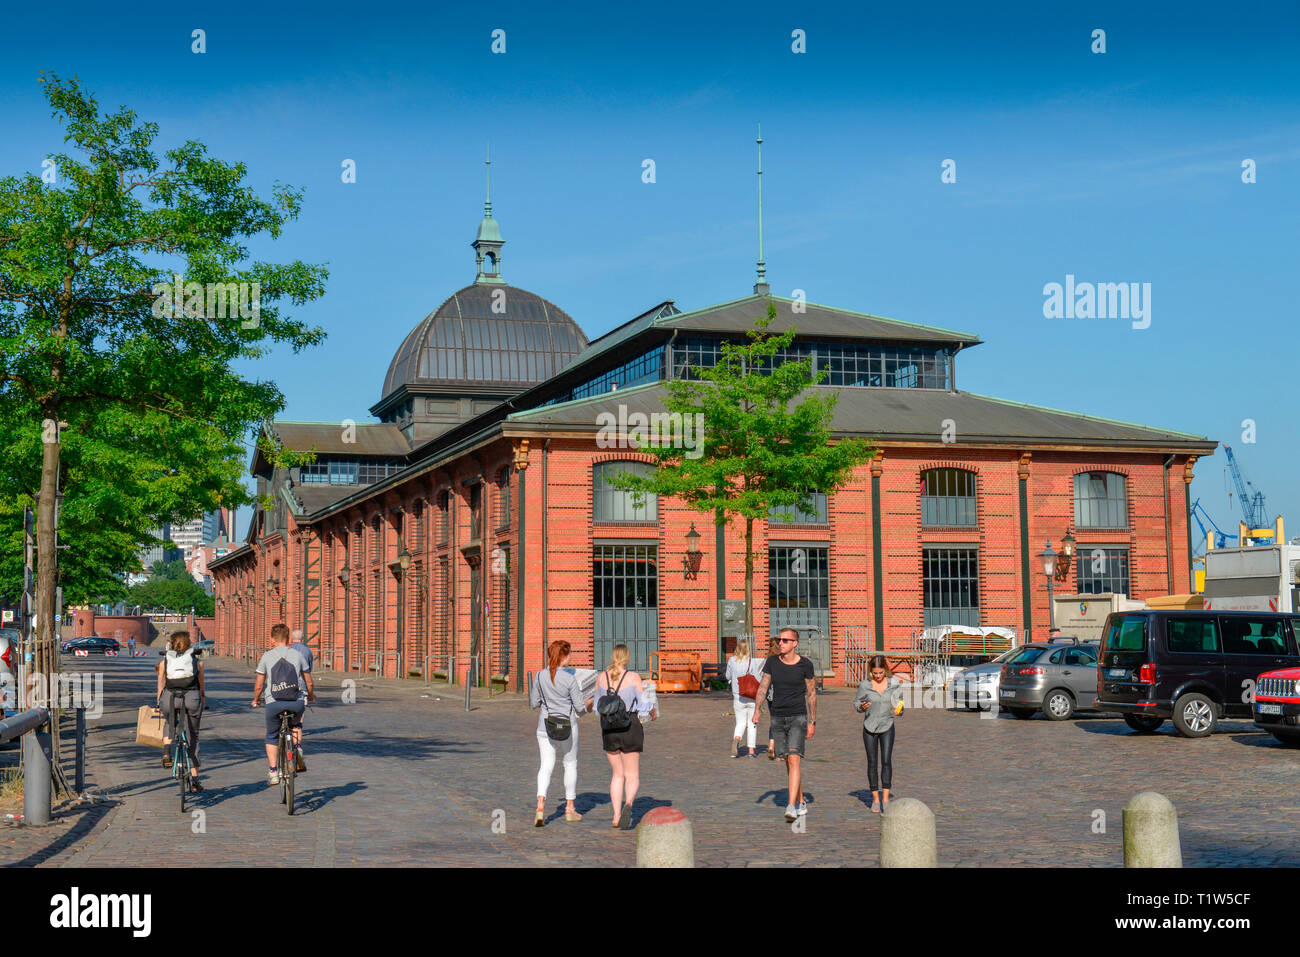 stock photography and images - Page 13 - Alamy